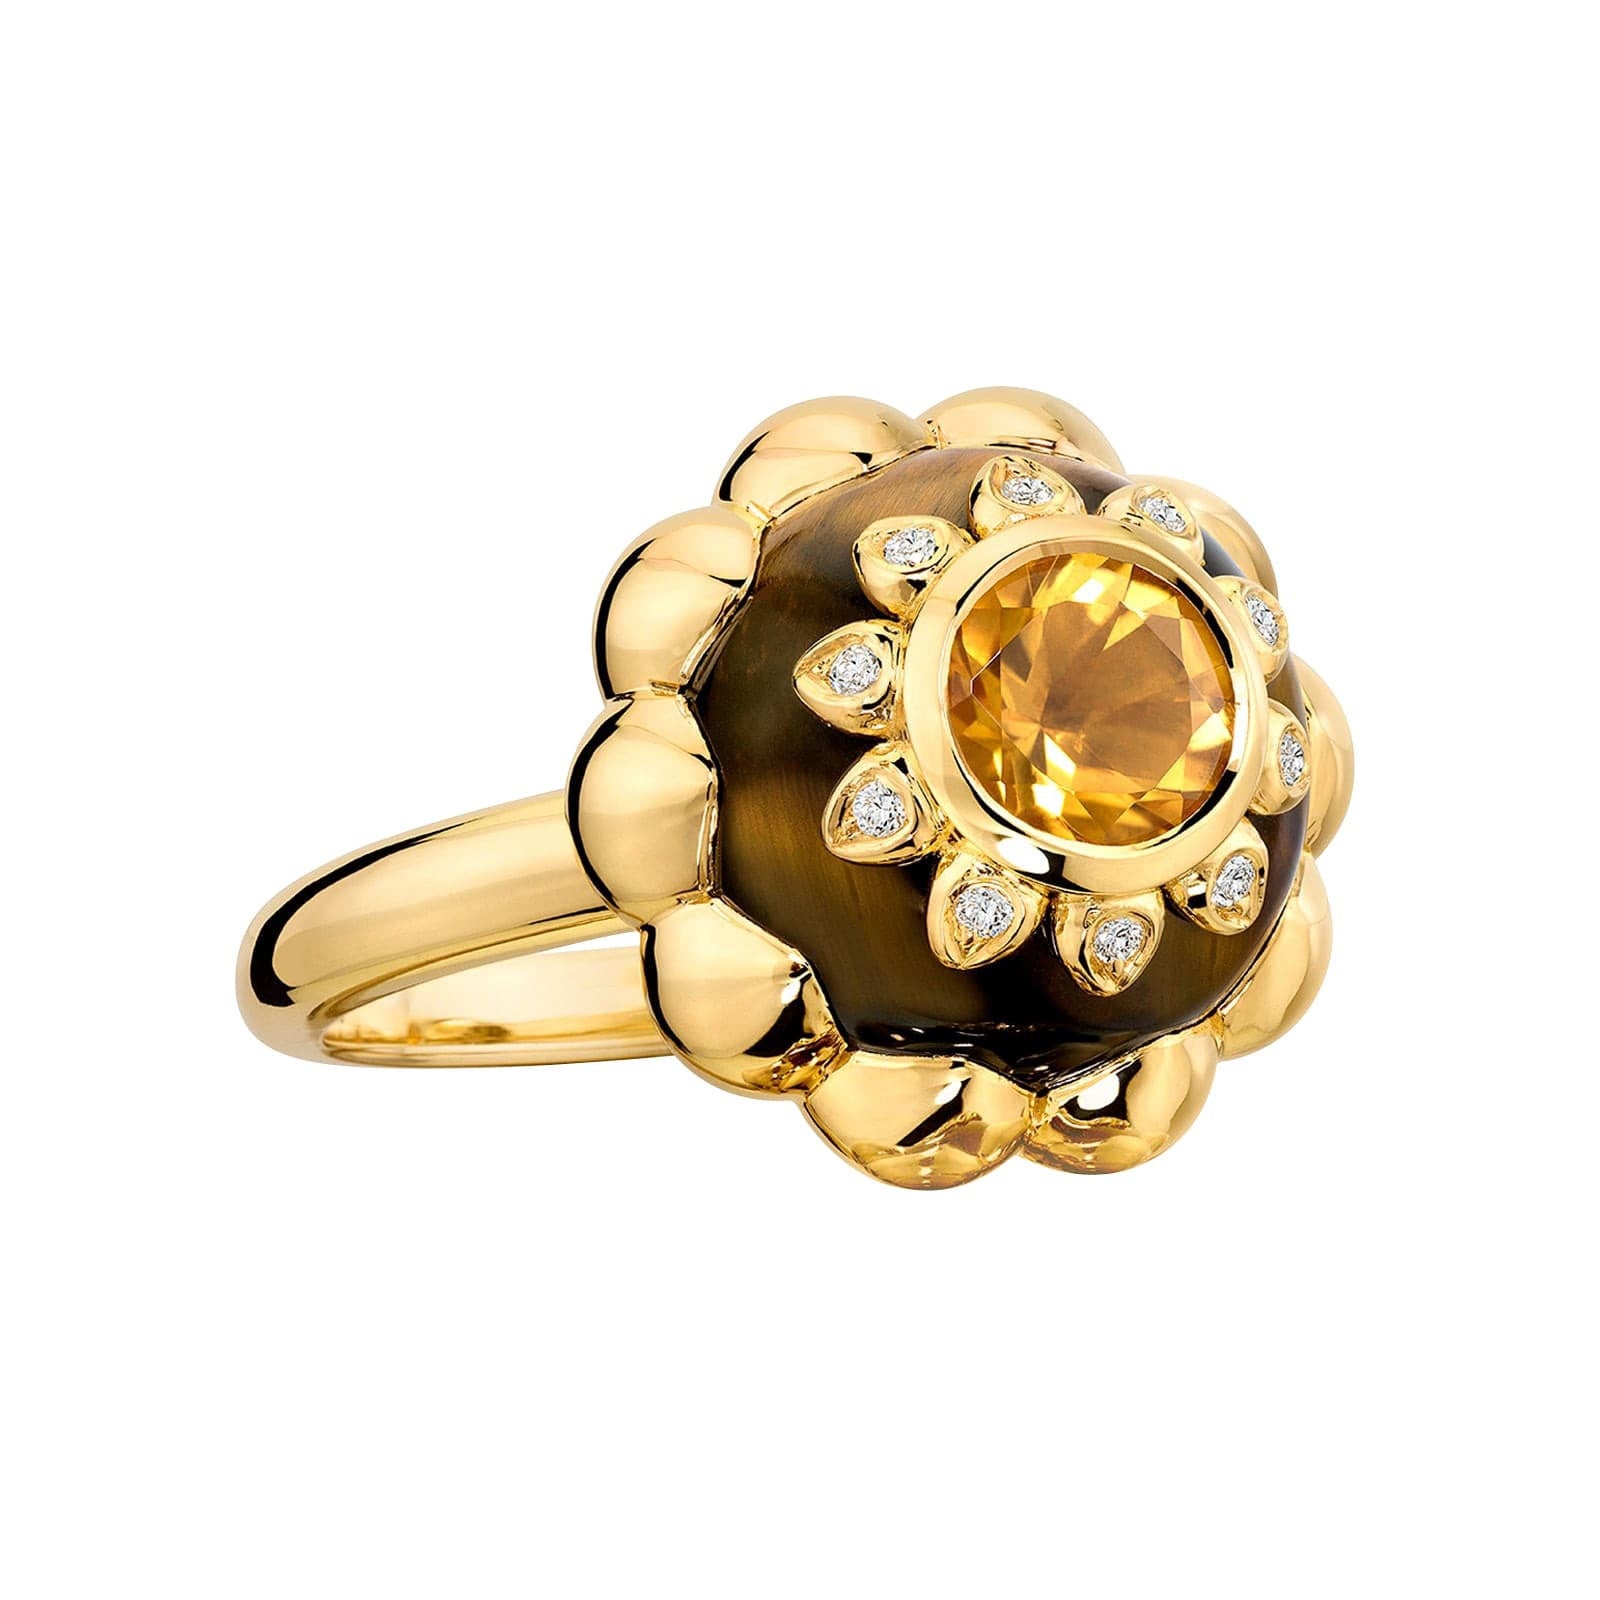 Broken English Jewelry - SOLAR PLEXUS TIGER’S EYE AND CITRINE RING BY STEPHANIE WENK FOR SAUER